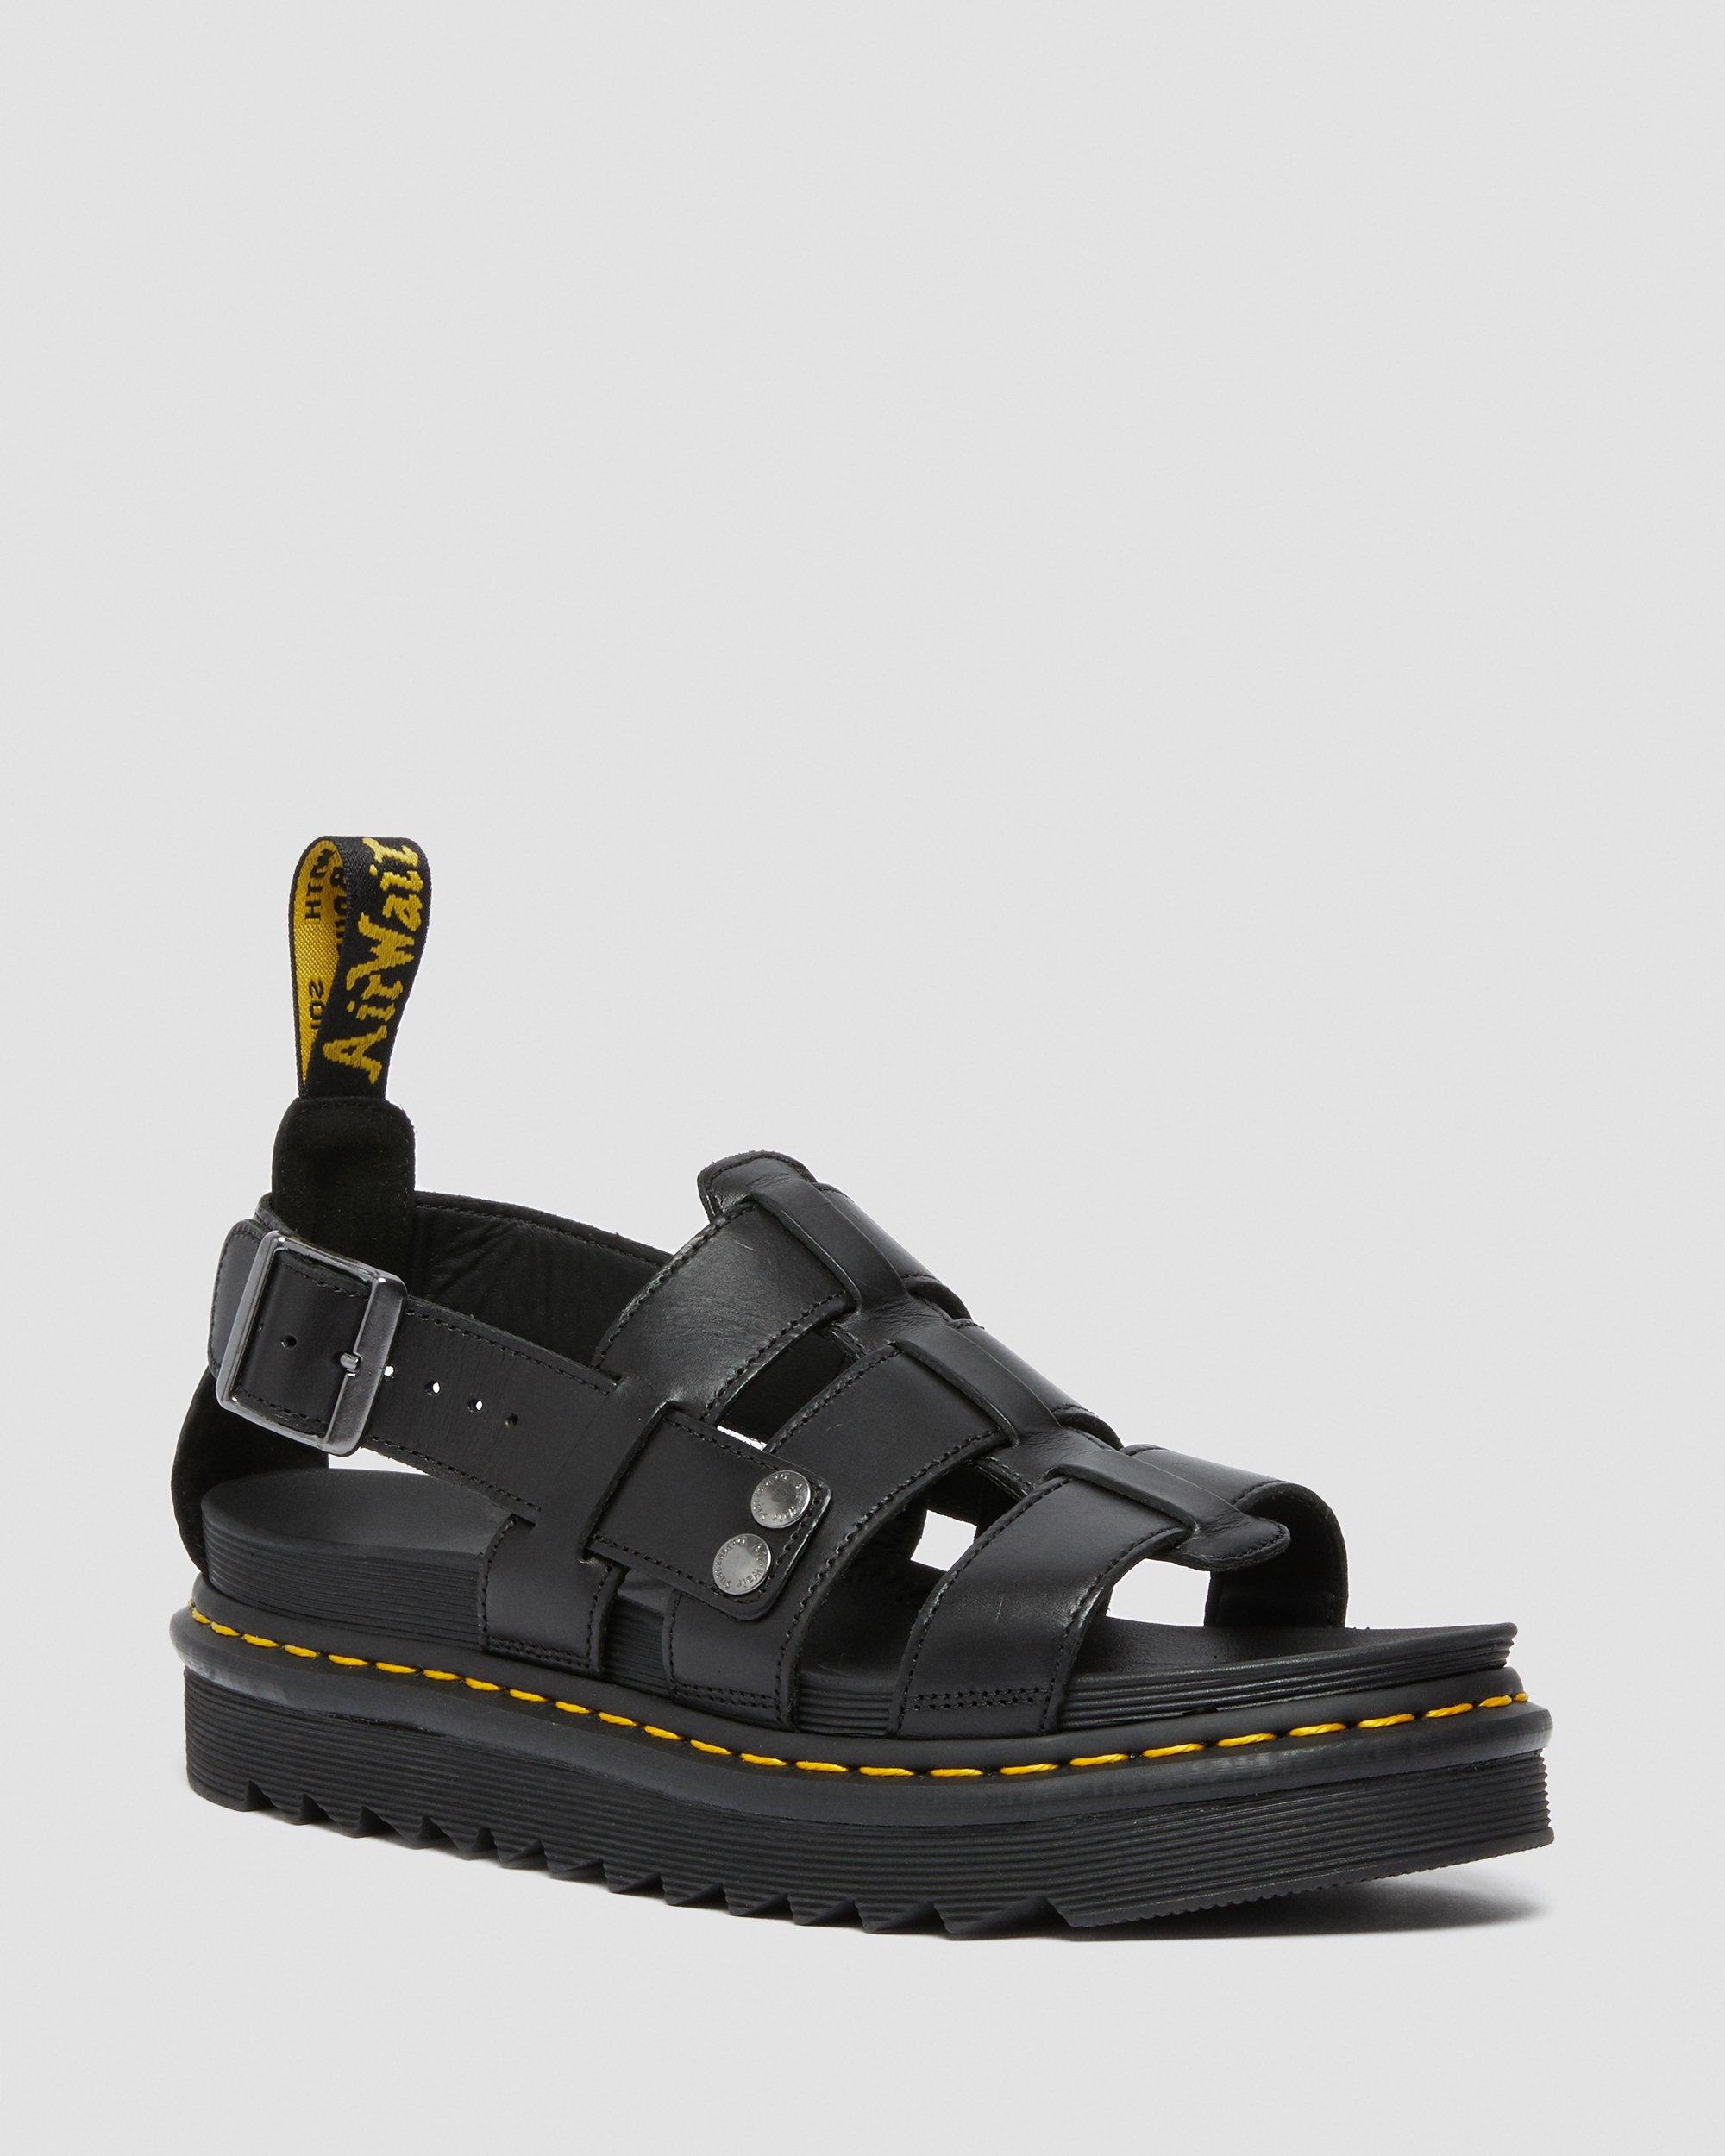 TERRY LEATHER STRAP SANDALS | Dr. Martens